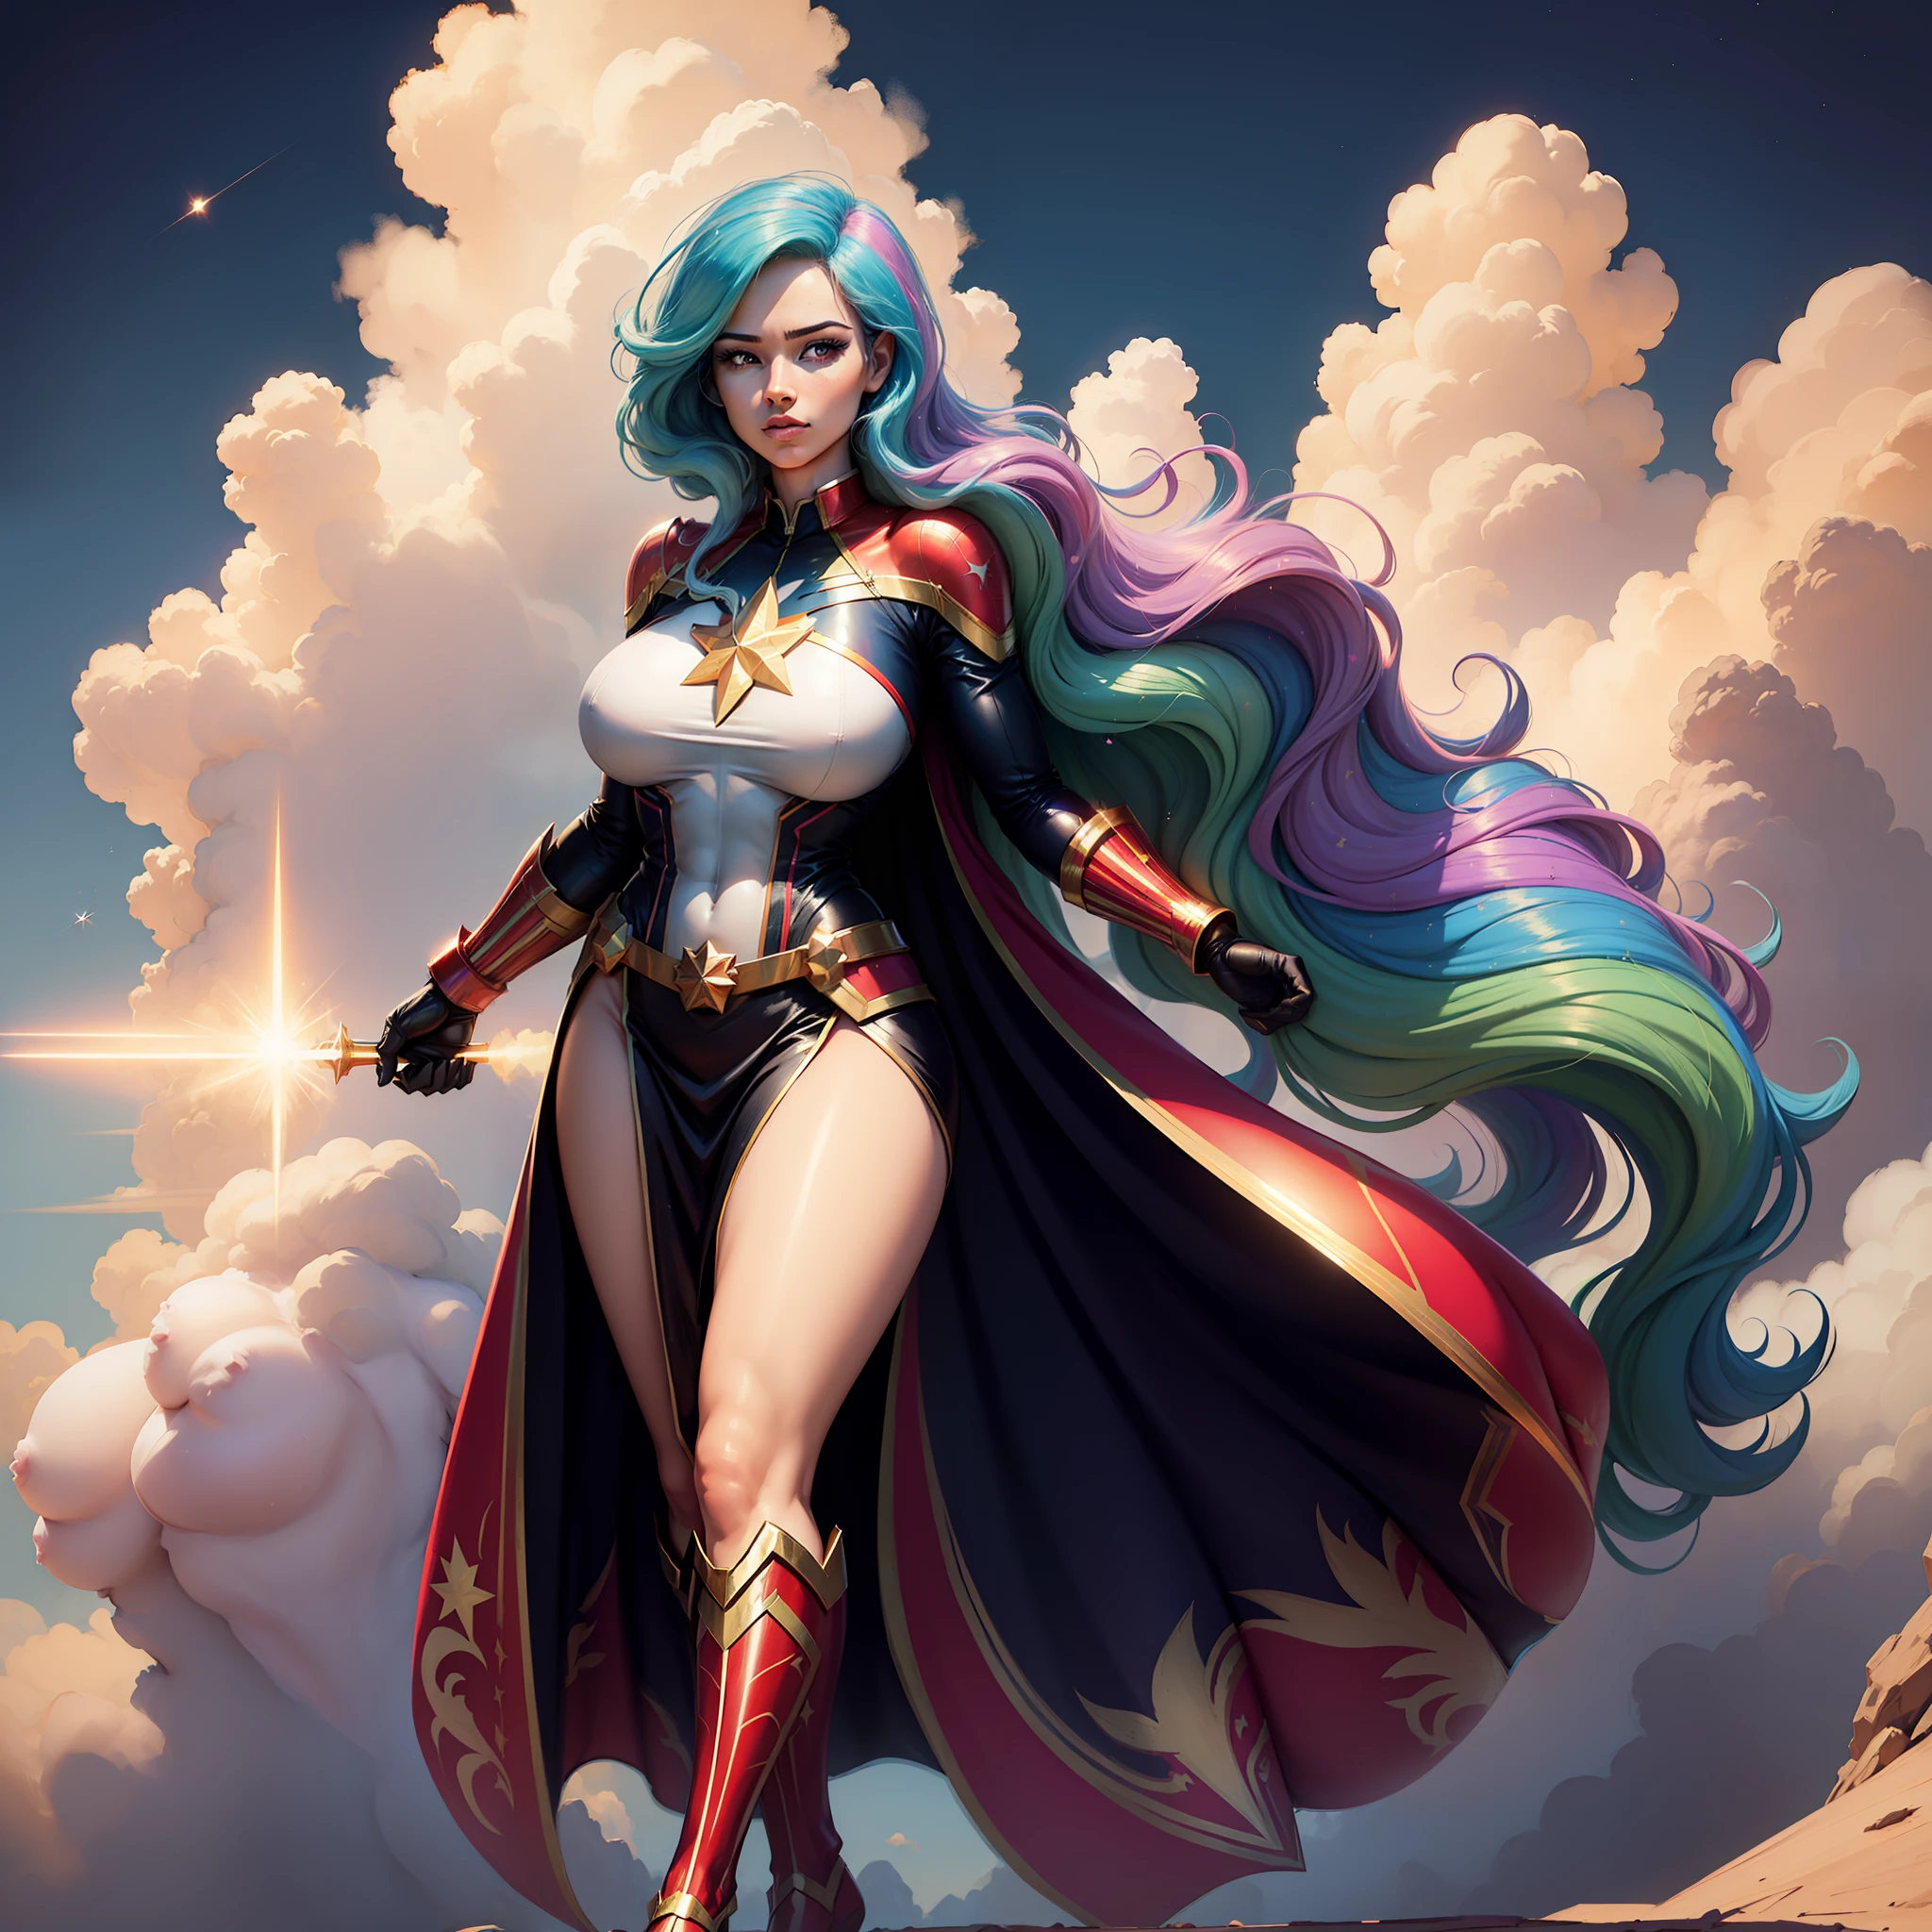 Princess celestia, Huge-breasts, Lush breasts, Elastic breasts, hairlong, Luxurious hairstyle, In the costume of Captain Marvel, in the sky, superhero, in full height, Evil Look, Magic, Flight beam, beste-Qualit, Very detailed, 8K quality, in full height